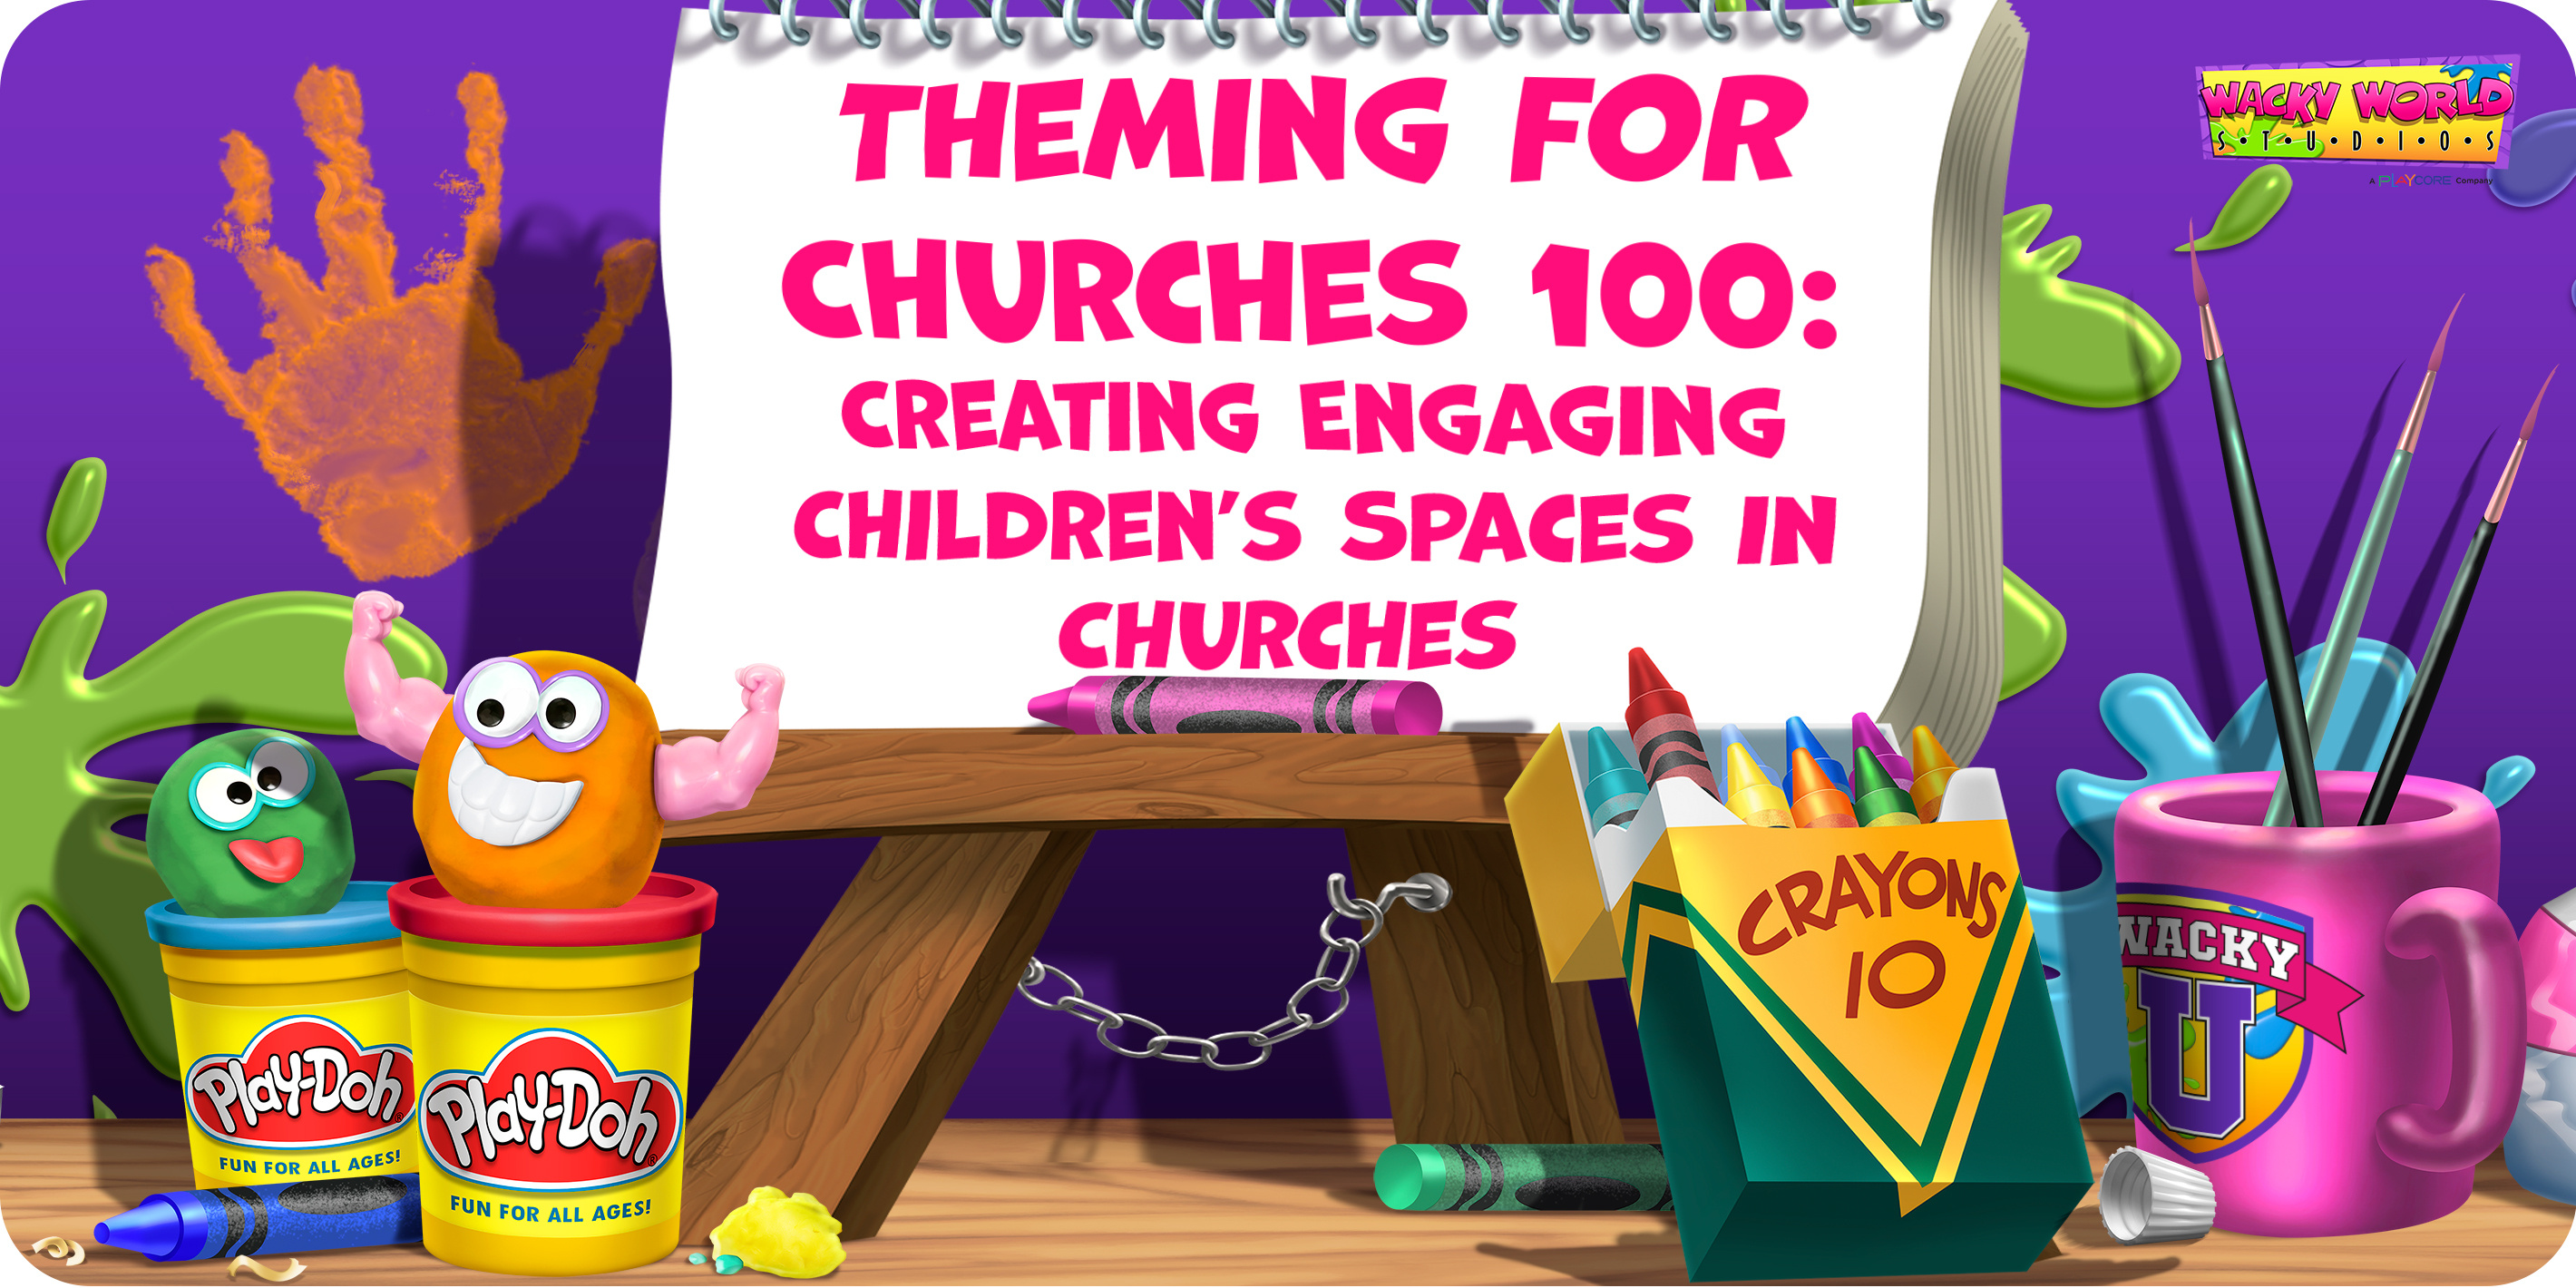 Creating Engaging Children's Spaces in Churches